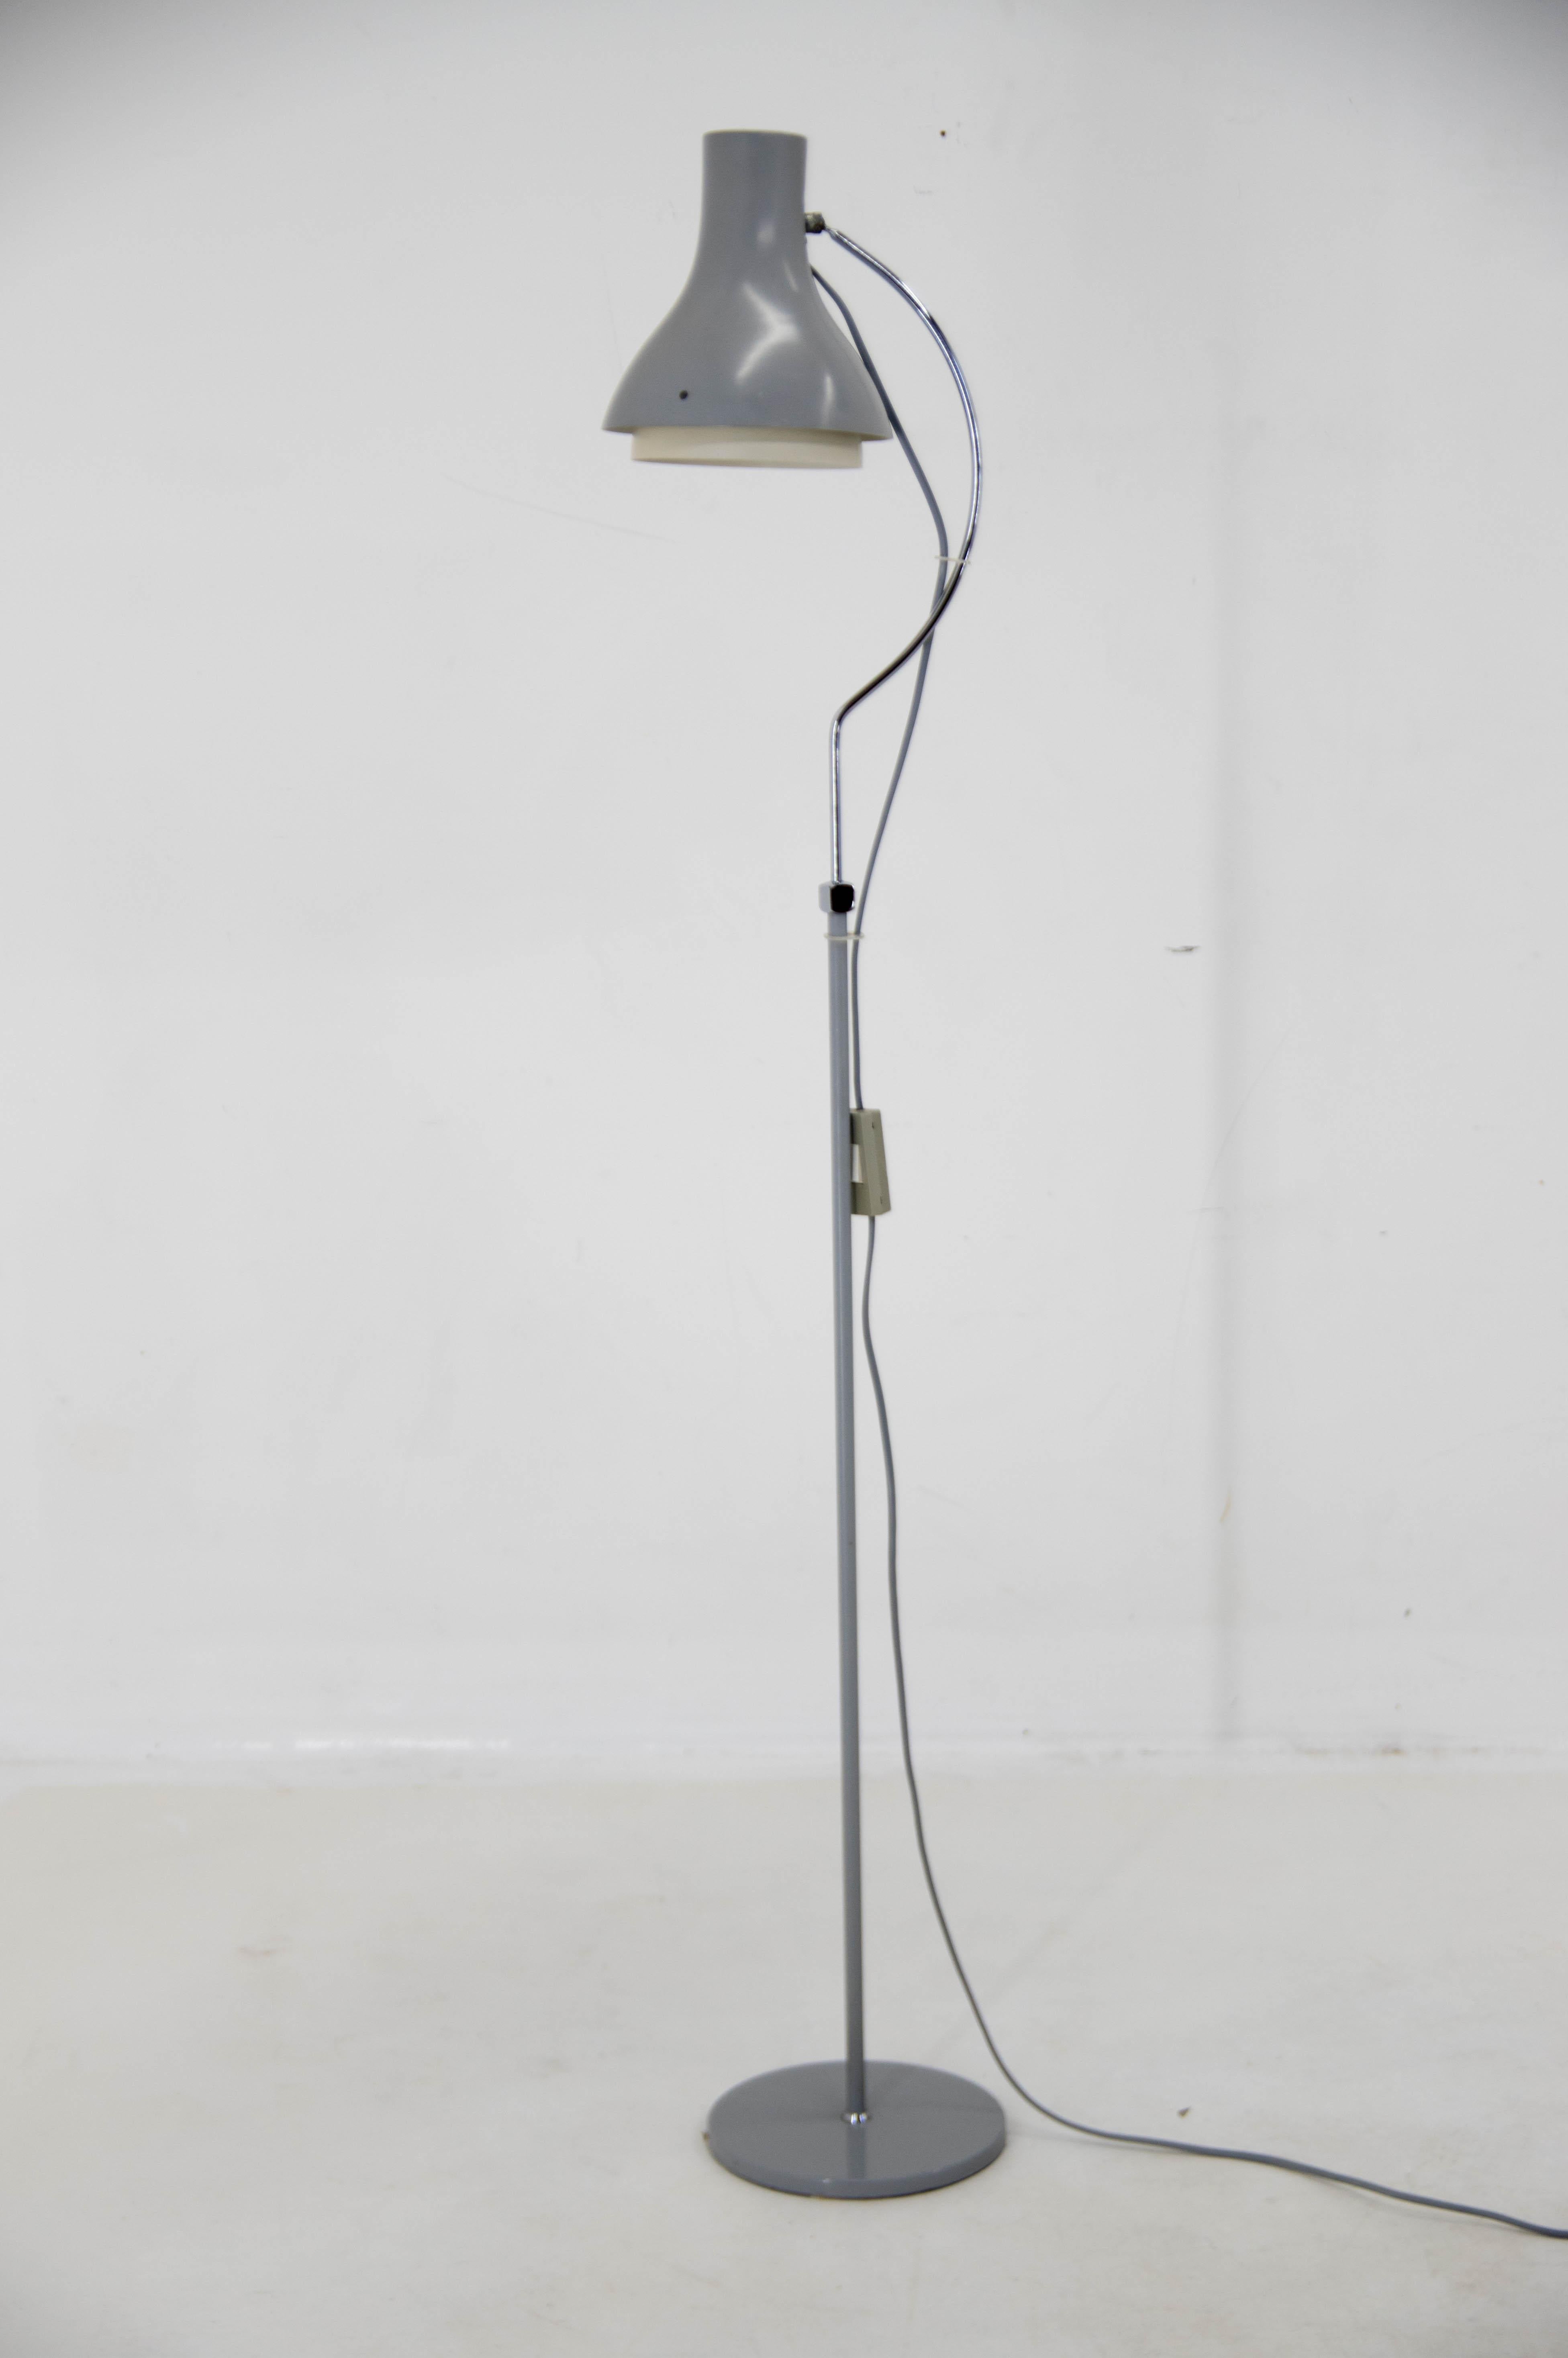 Floor lamp designed by Josef Hurka for Napako in 1960s.
1xE27 or E26 bulb, max 60W.
US plug adapter included